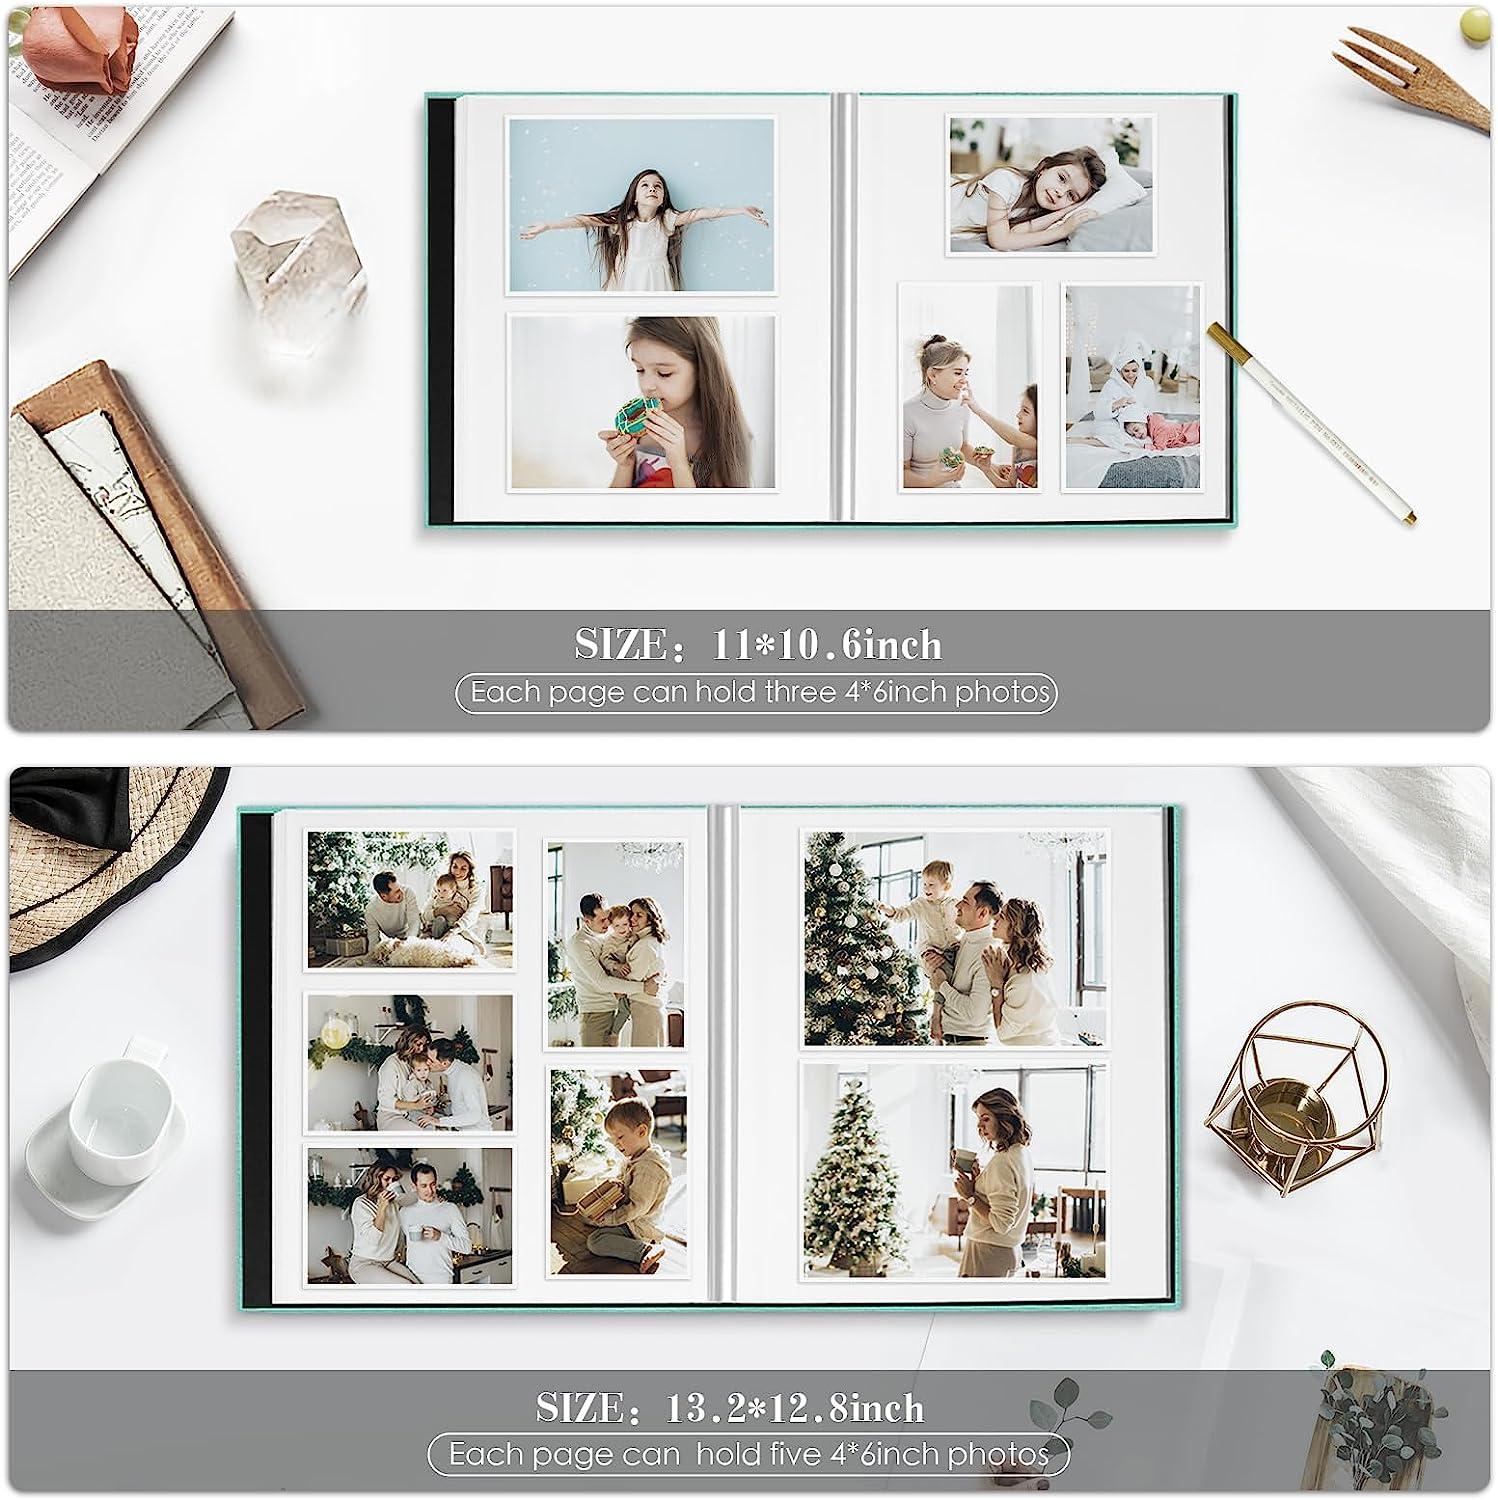 Spbapr Photo Album Self Adhesive 3x5 4x6 5x7 85x11 Magnetic Scrapbook 11 x Width 106 (inches) 40 Pages Linen Cover DIY Photo Album with A Metallic Pen